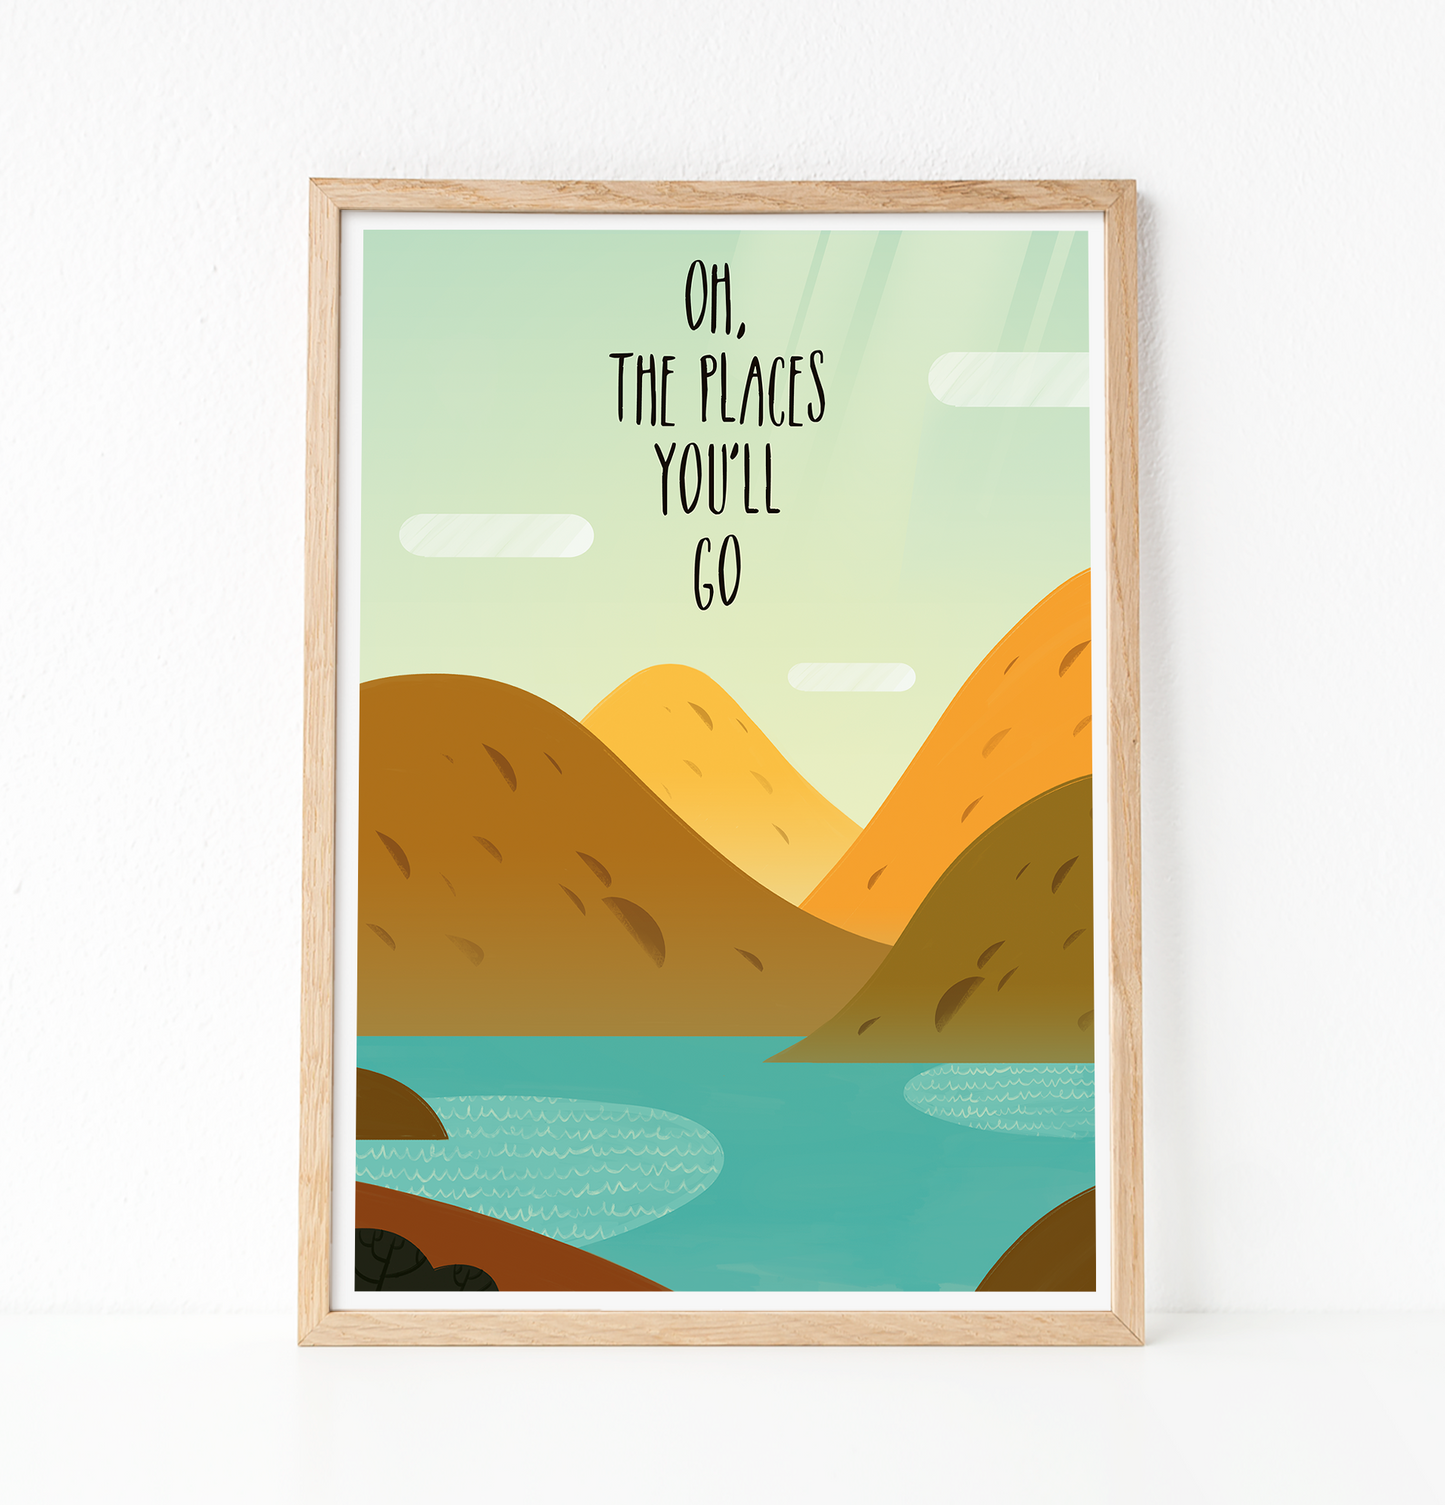 Oh, the places you'll go quote print